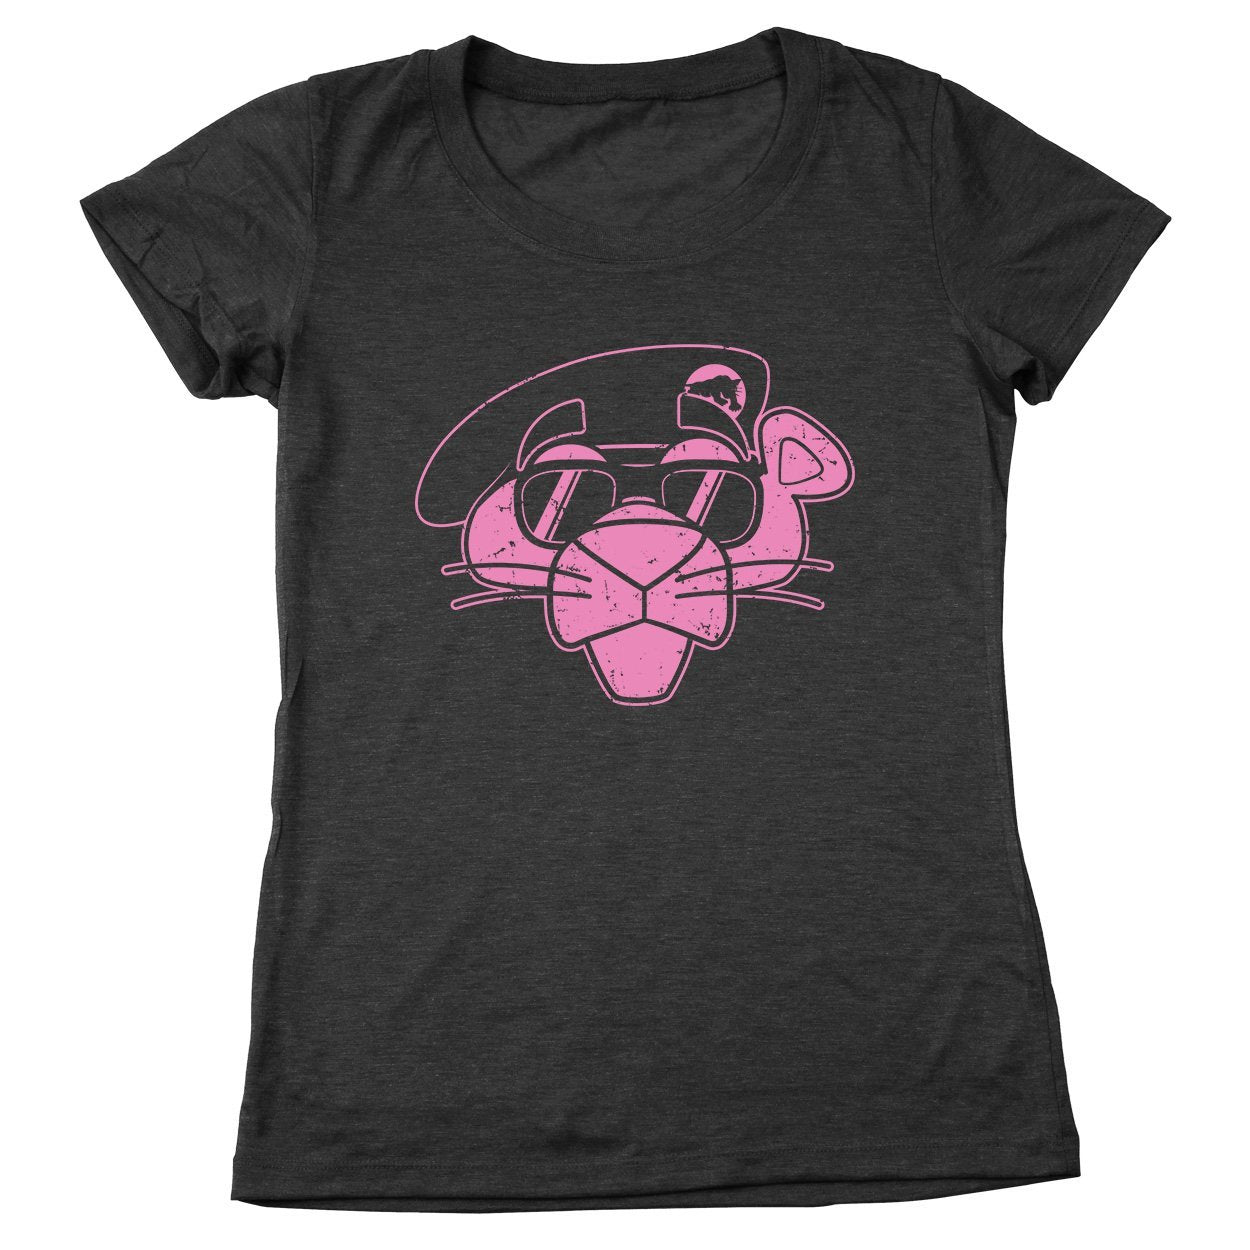 The Pink Black Panther Women's Relaxed Fit Tri-Blend T-Shirt